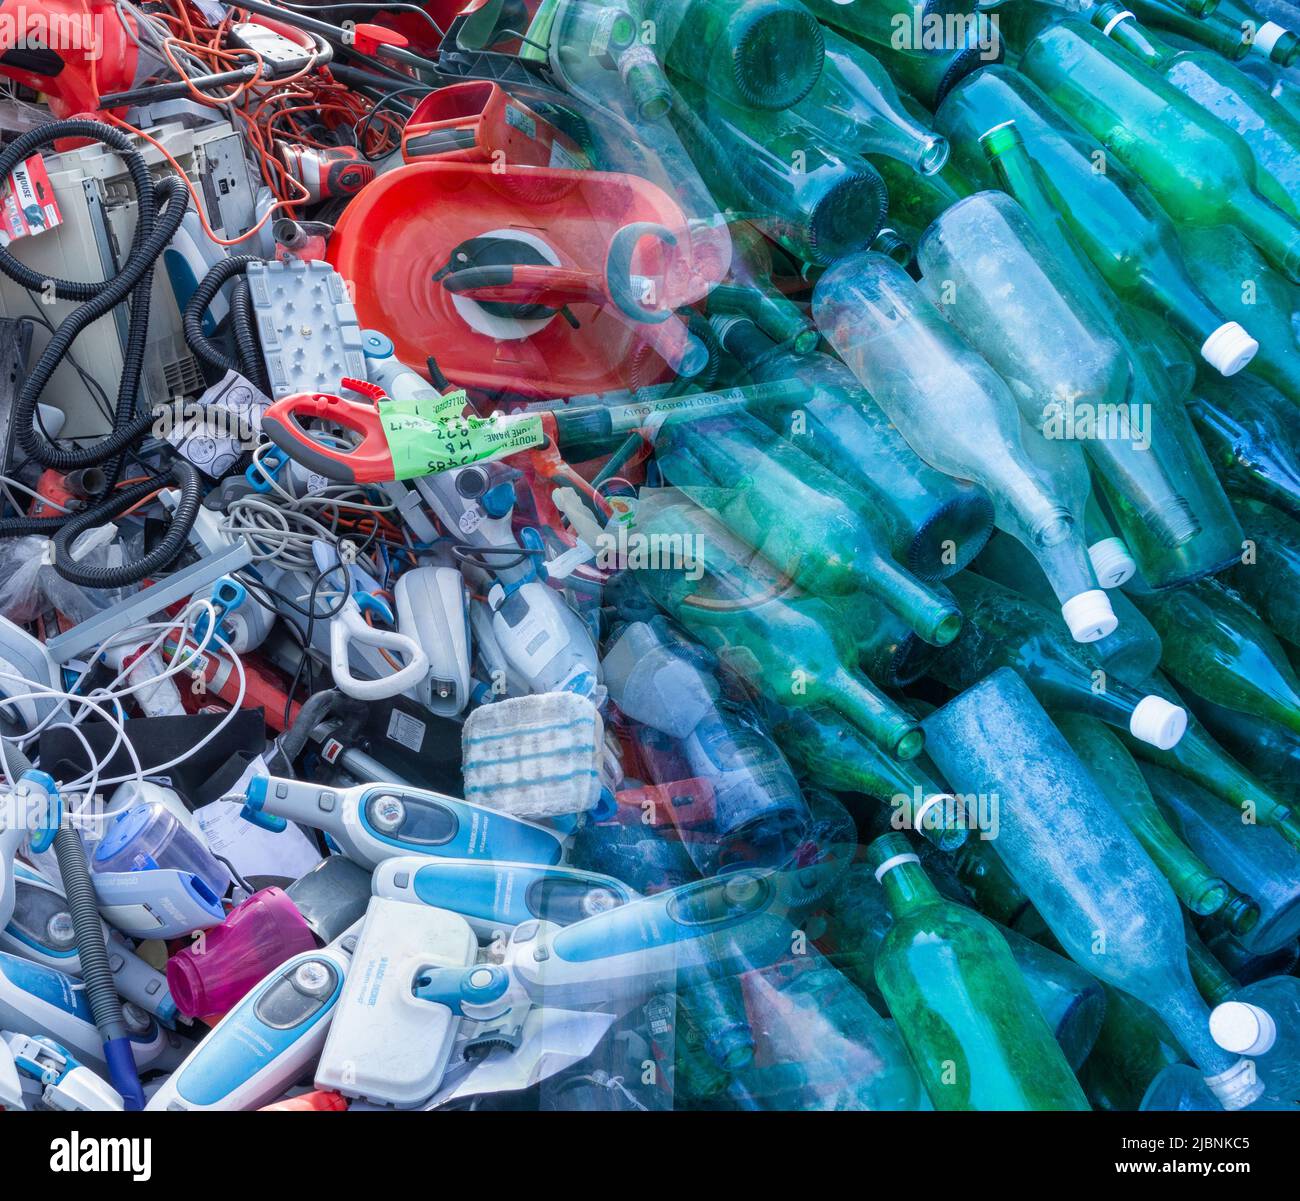 Waste plastic, vacuum cleaners... and glass recycling composite image. Throw away society, consumerism, global warming pollution...concept Stock Photo